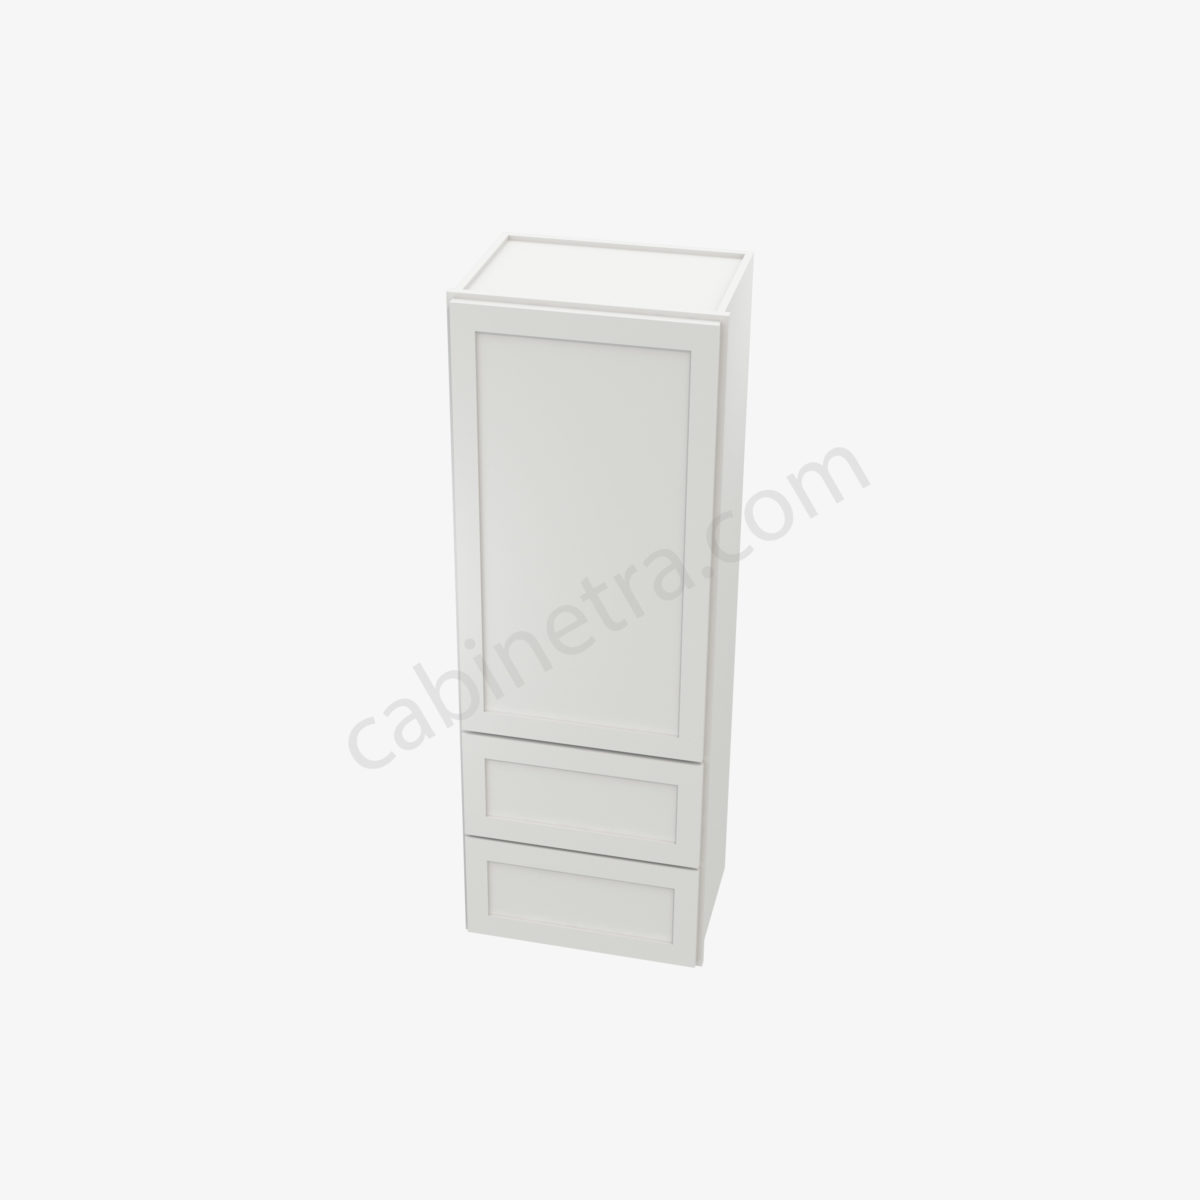 AW W2D1854 3 Forevermark Ice White Shaker Cabinetra scaled